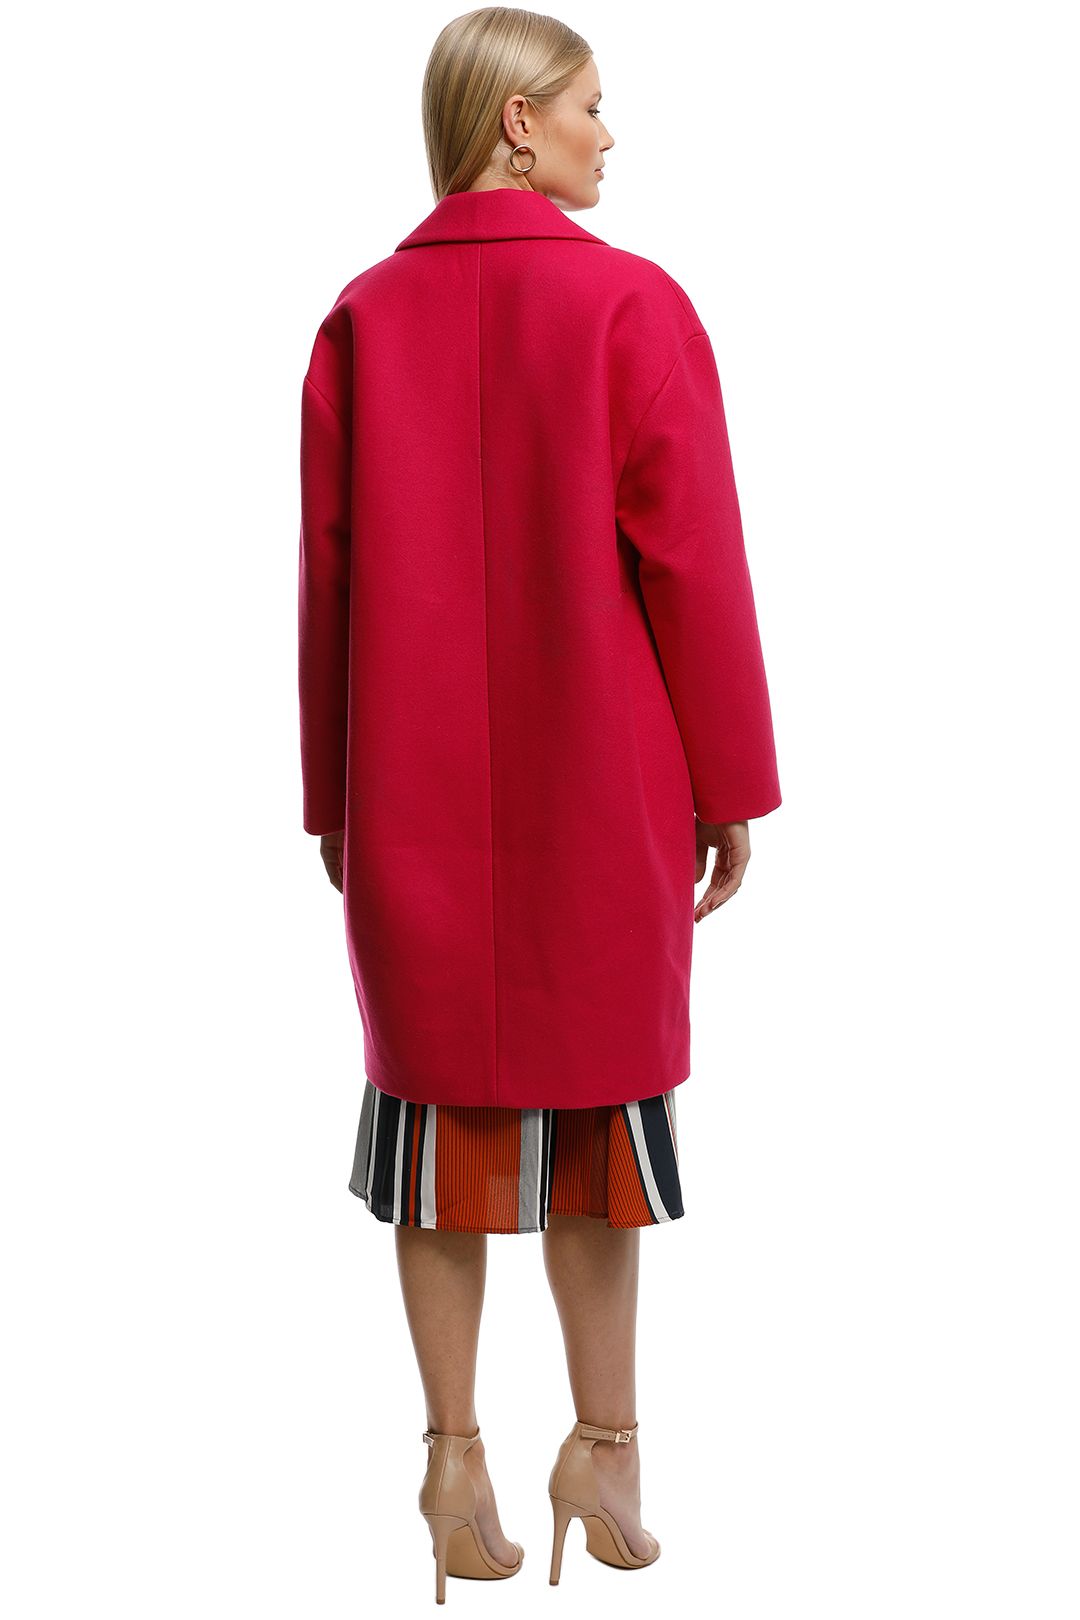 MNG-Unstructured-Wool-Blend-Coat-Fuchsia-Back